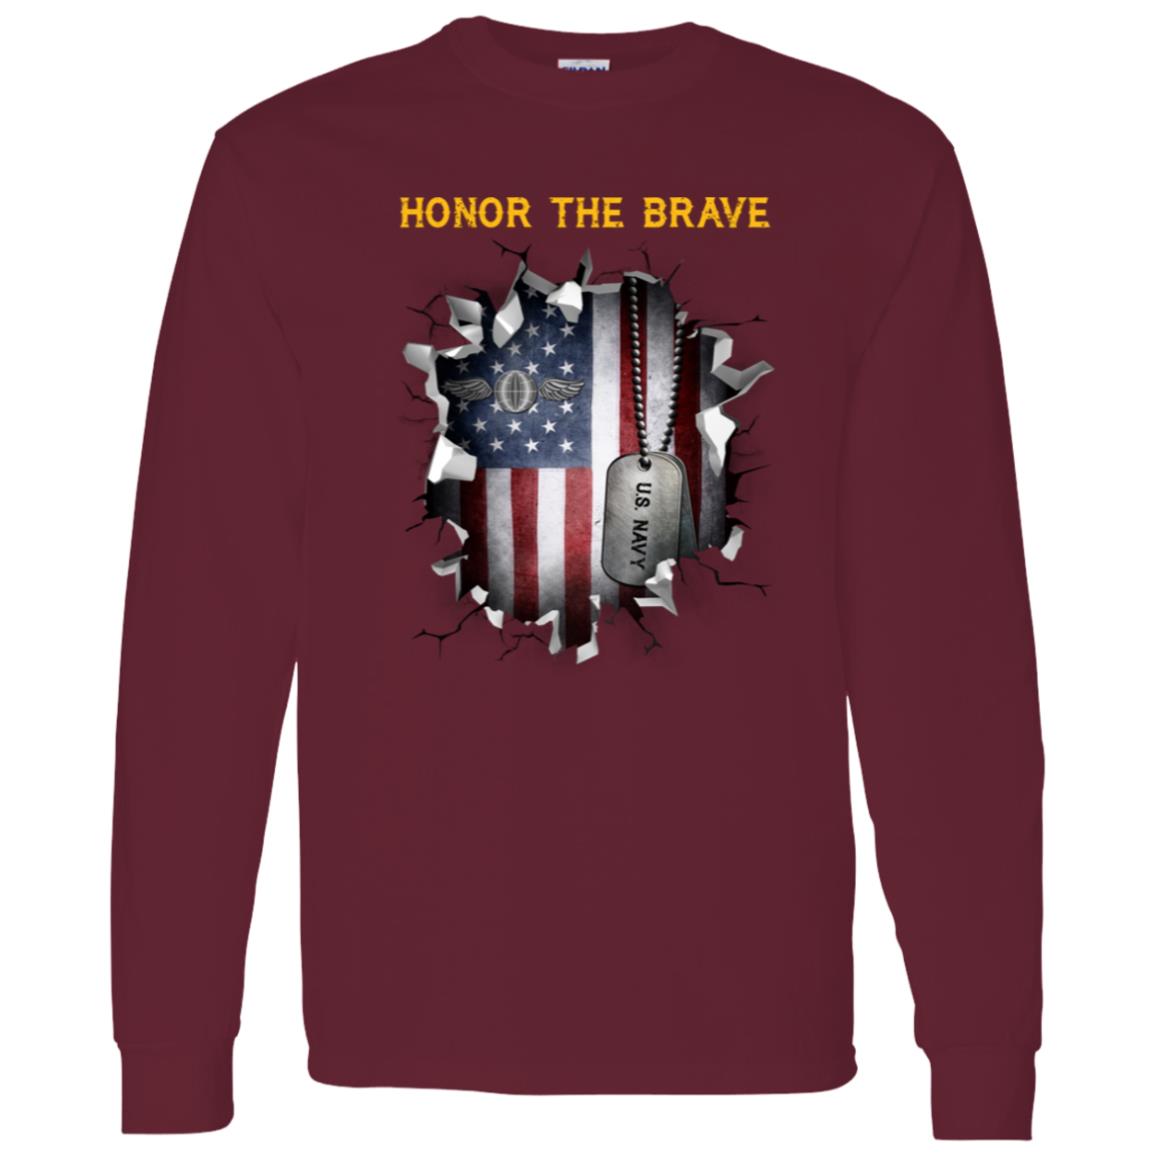 Navy Aviation Electronics Mate Navy AE - Honor The Brave Front Shirt